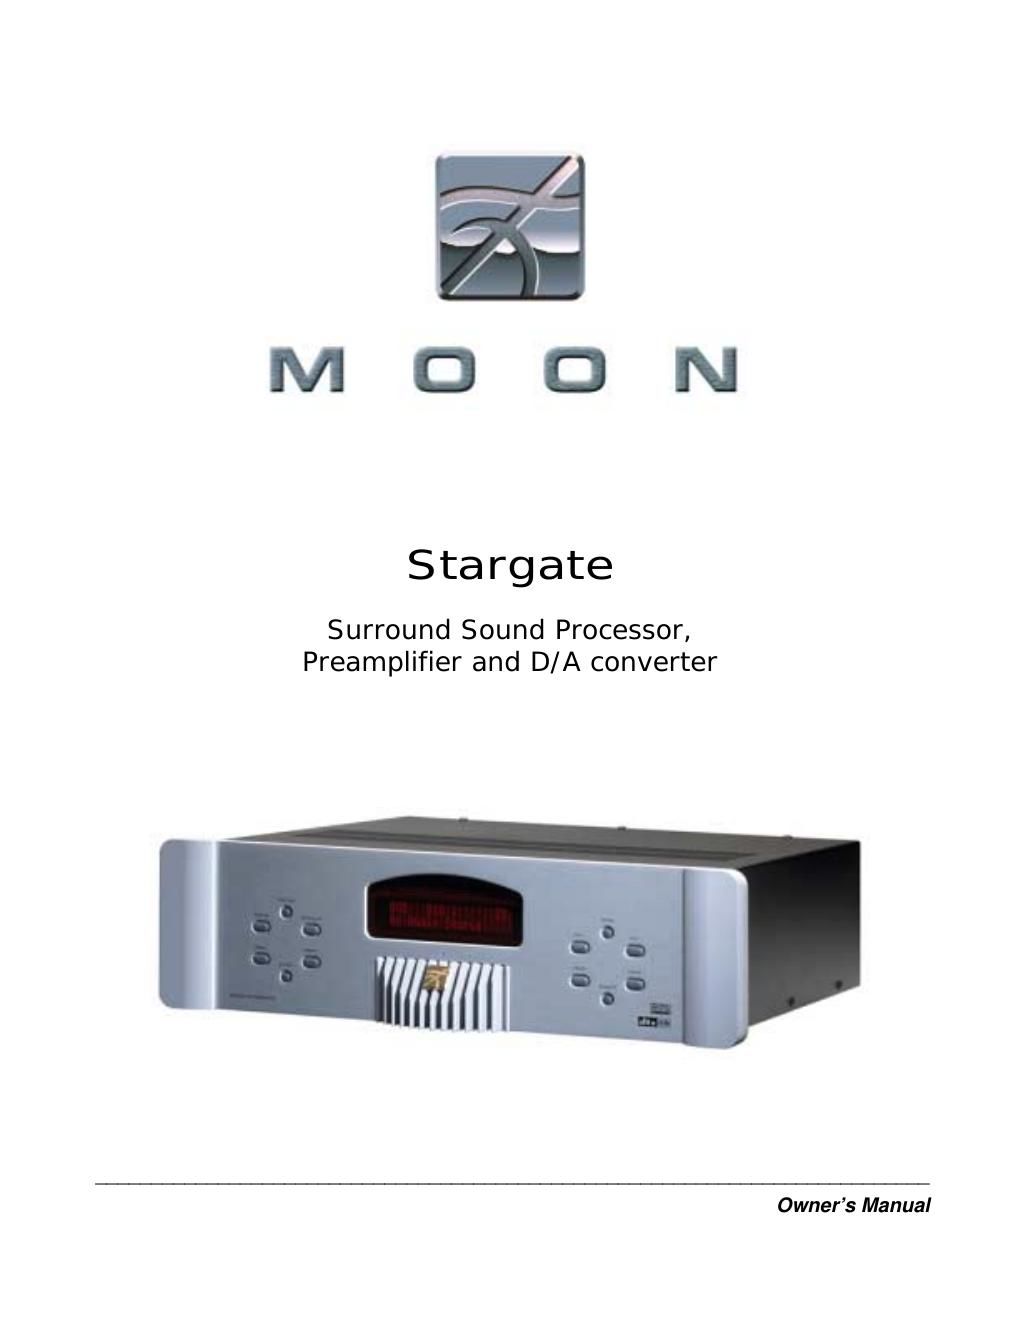 moon stargate owners manual